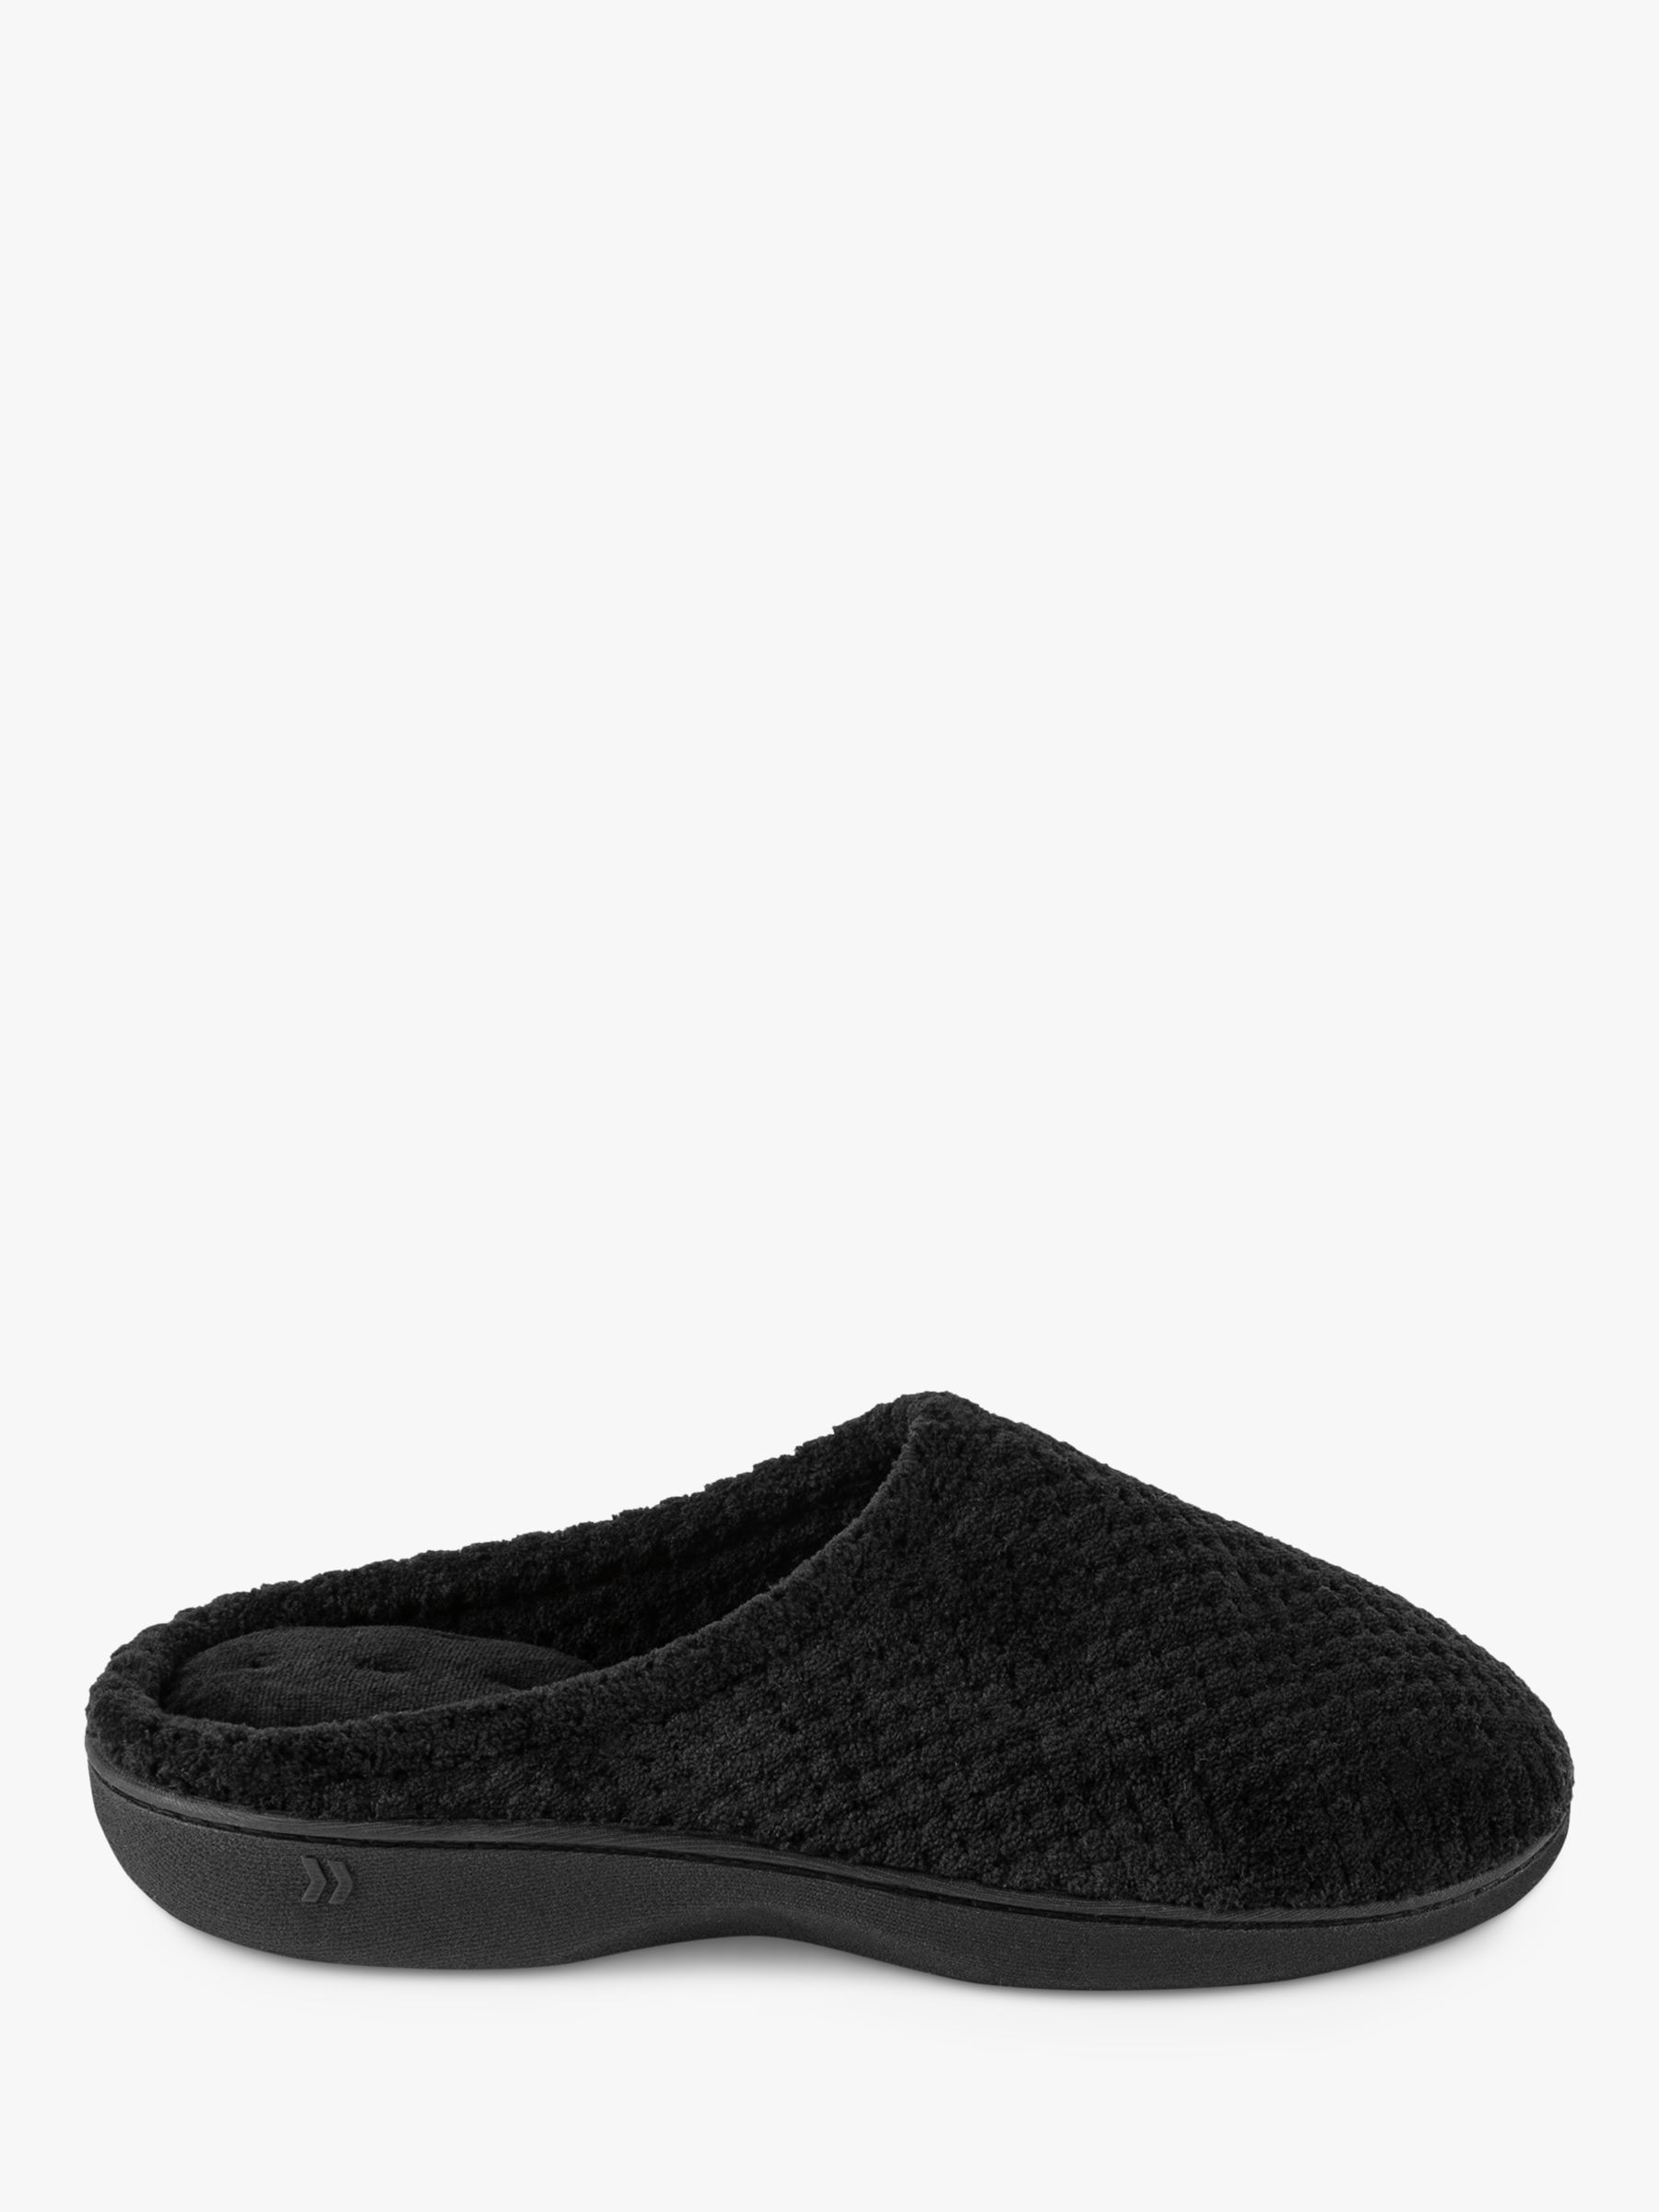 totes Popcorn Terry Mule Slippers, Black, 4